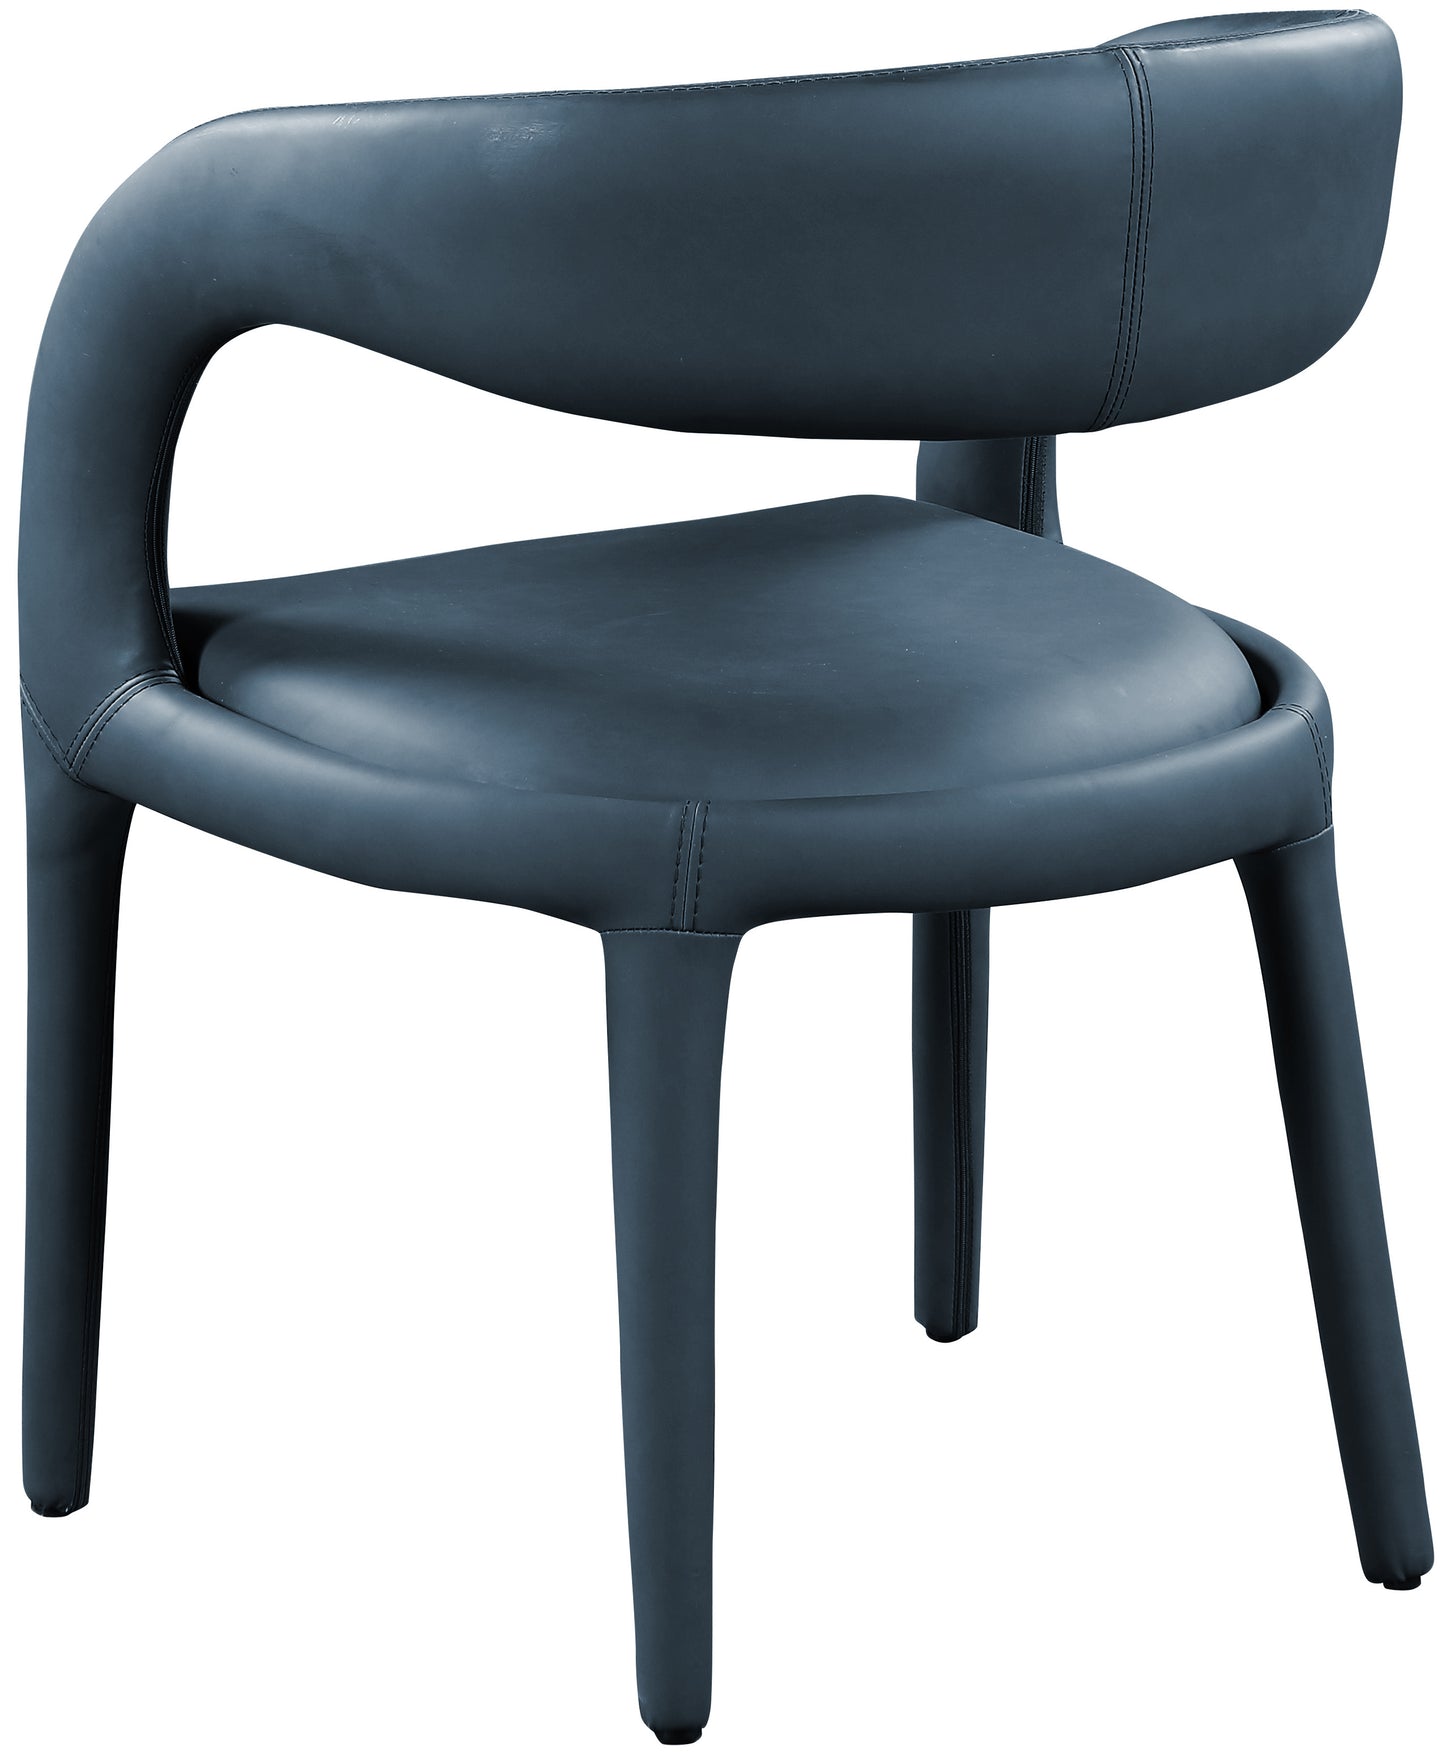 alexis navy faux leather dining chair c